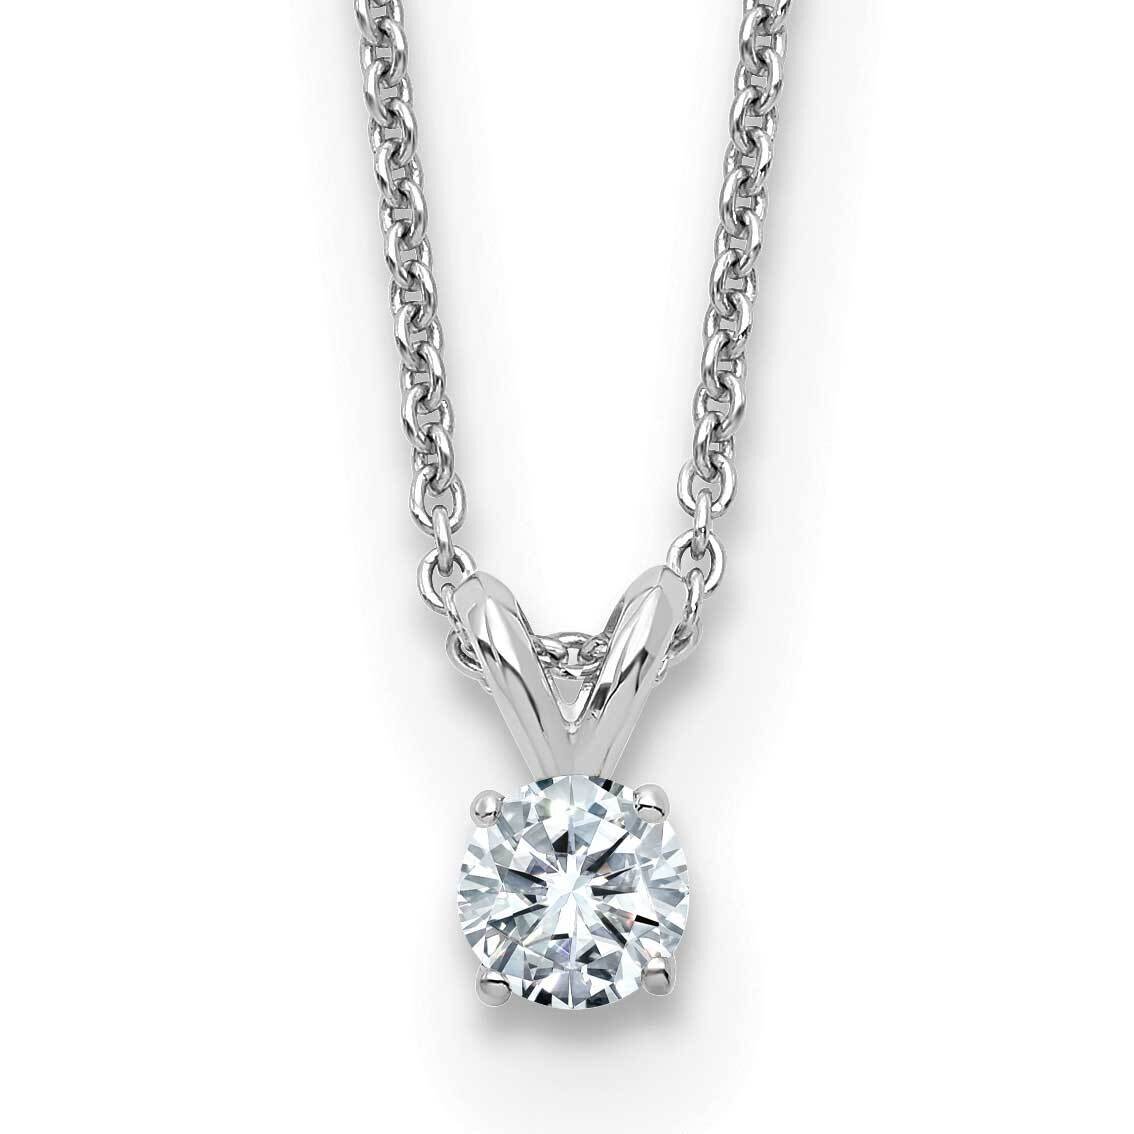 1/4ct. 4.0mm Round D E F Pure Light Moissanite Solitaire Necklace 14k White Gold WG936-3MP